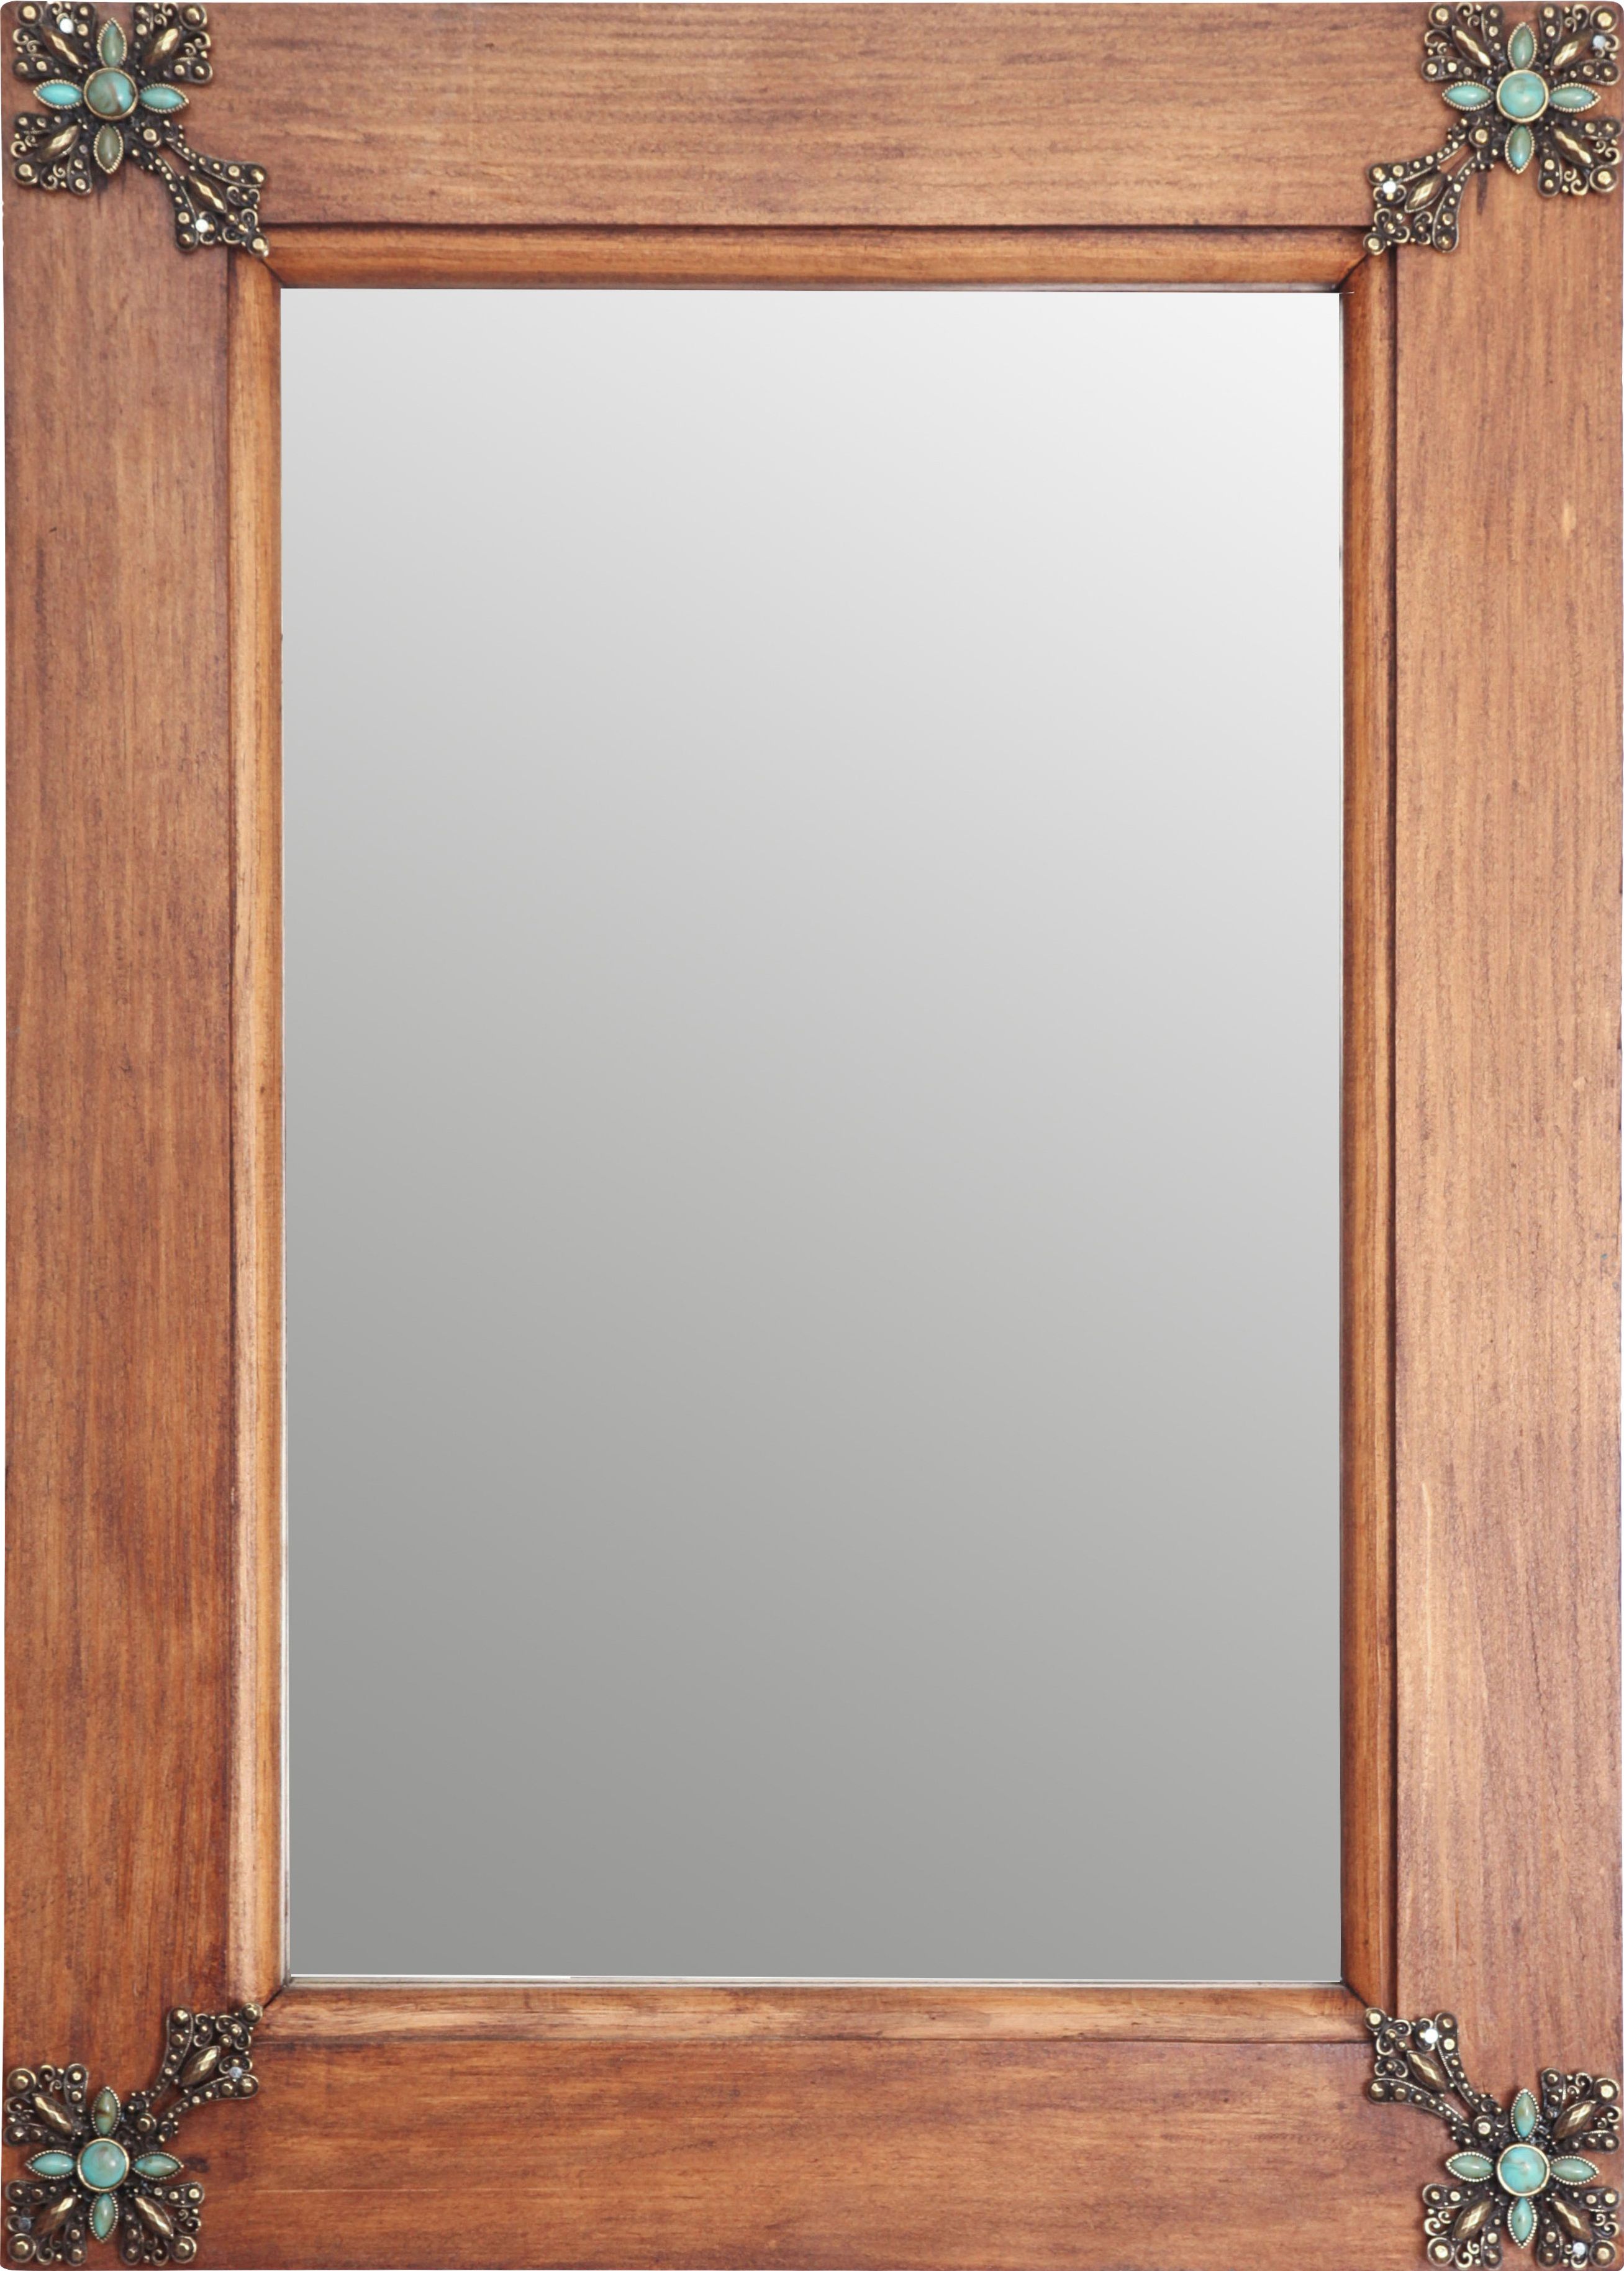 Concho Cross Rustic Accent Mirror Pertaining To Preferred Lajoie Rustic Accent Mirrors (Photo 10 of 20)